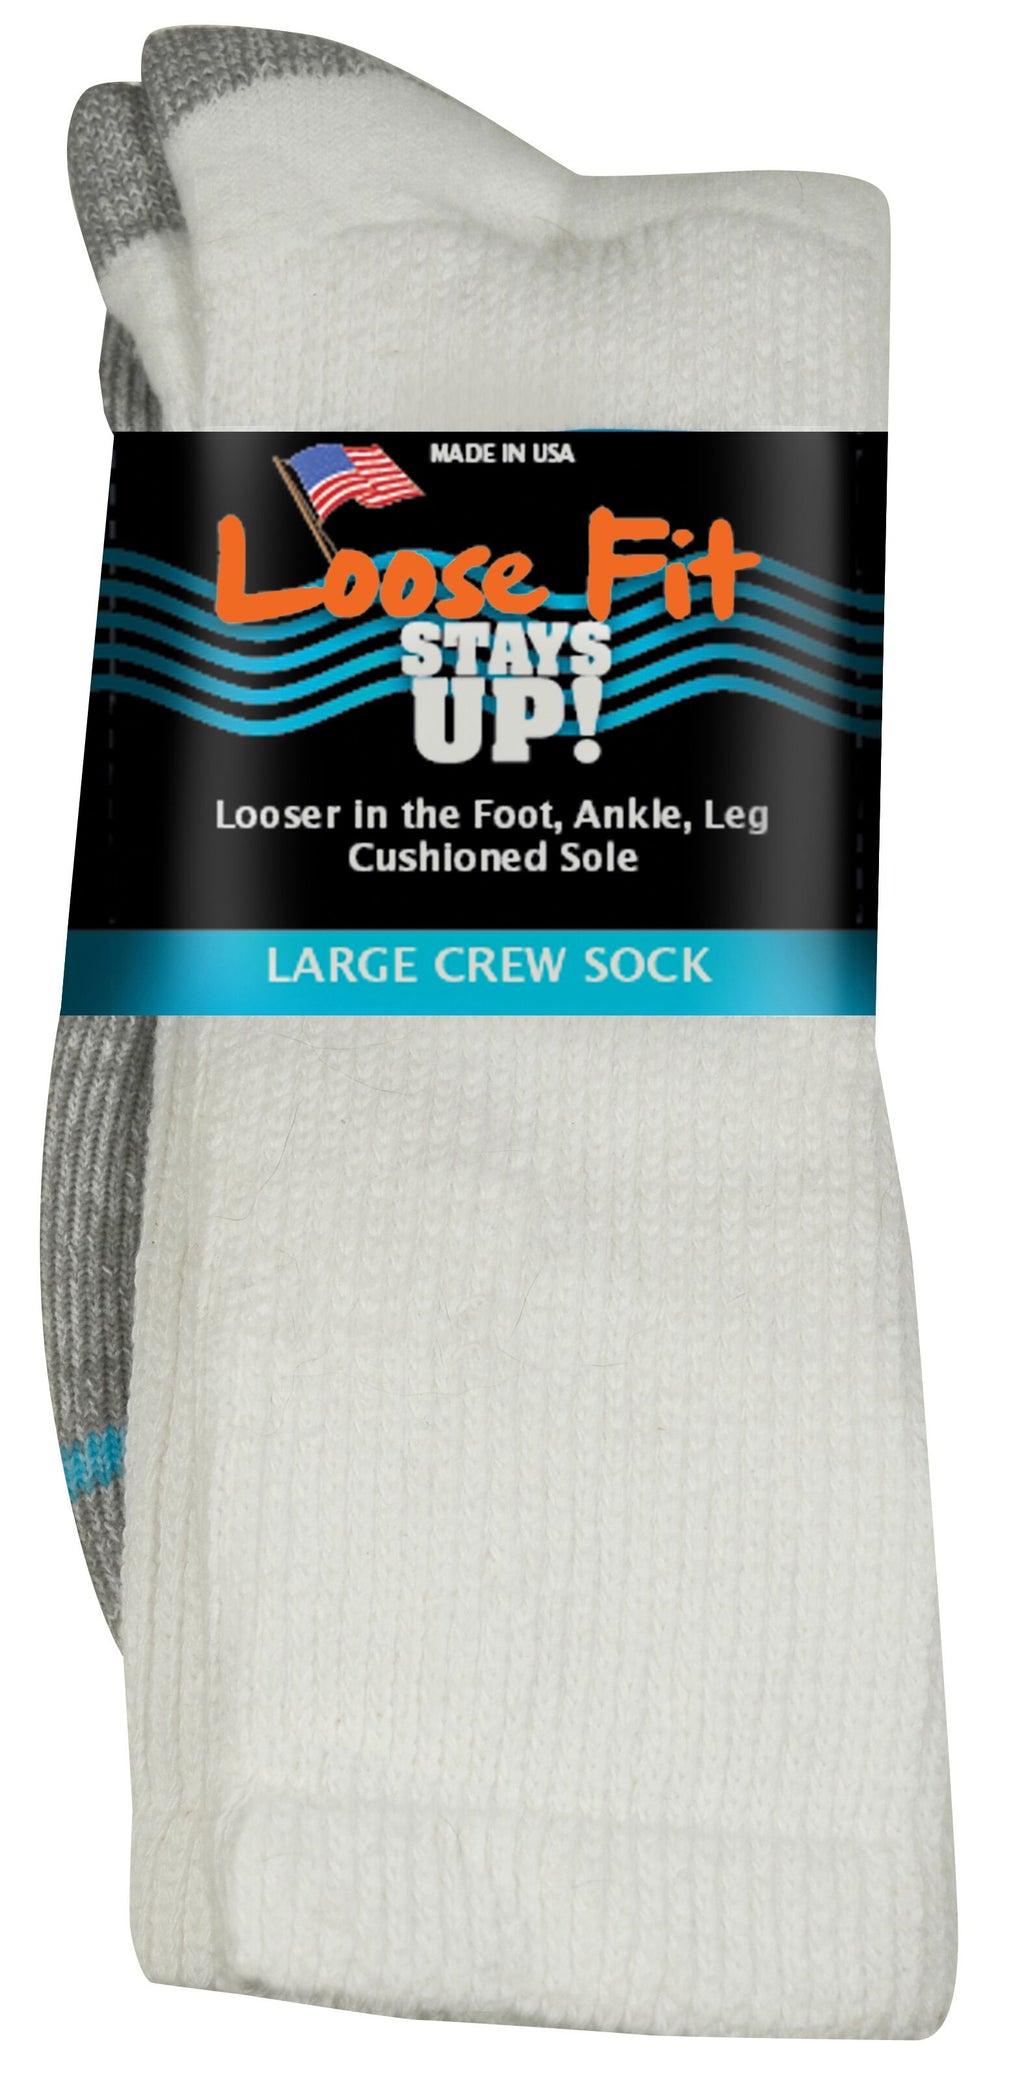 Loose Fit Stays Up Cotton Casual No Show Socks White / Extra Large